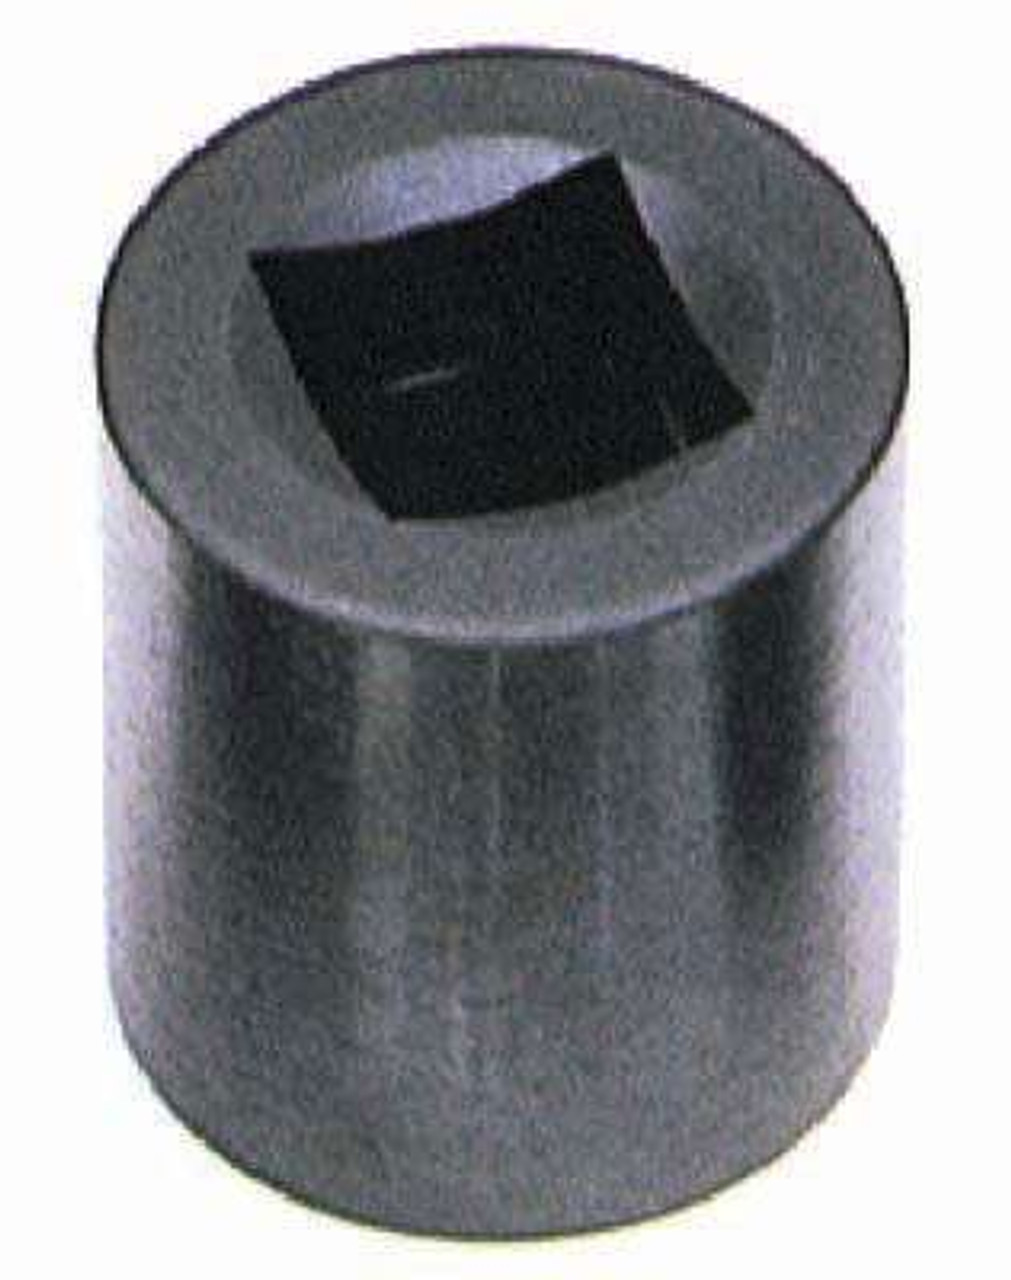 CDI 1/4'' Female Hex to 1/4'' Square Female Adapter - 260-27 260-27 physical CDI New Pro Torque Tools